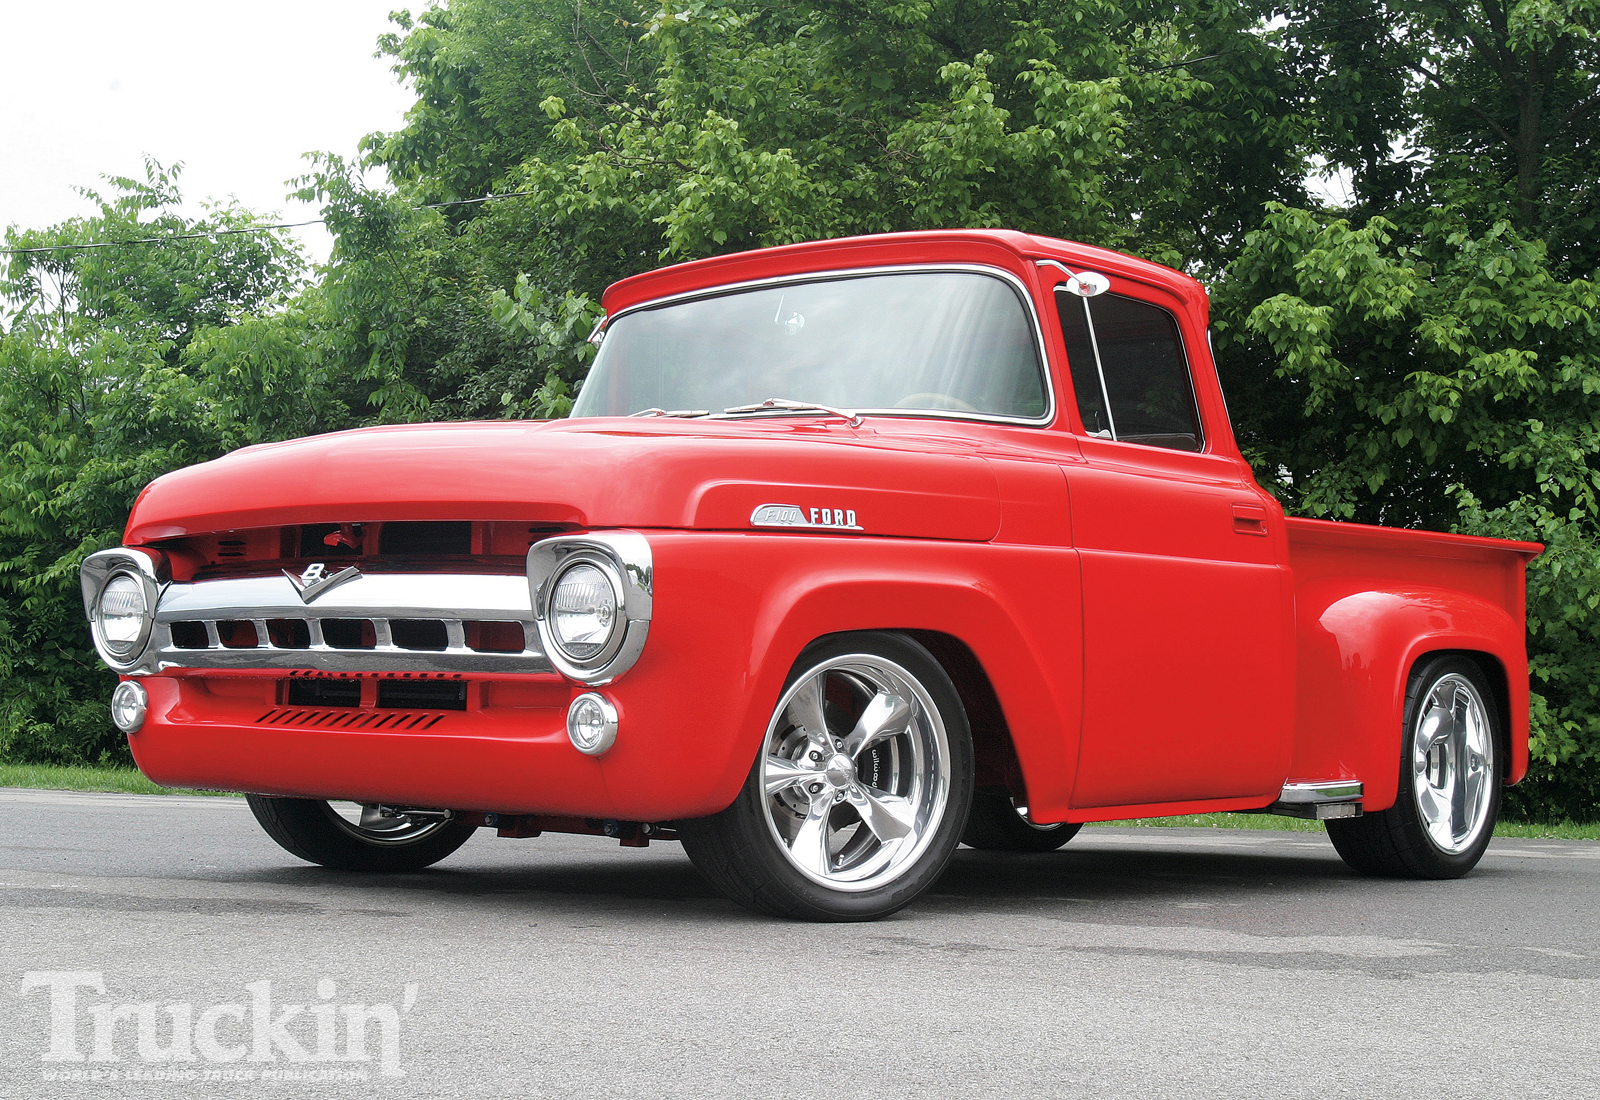 1957 Ford F-100 Backgrounds, Compatible - PC, Mobile, Gadgets| 1600x1100 px